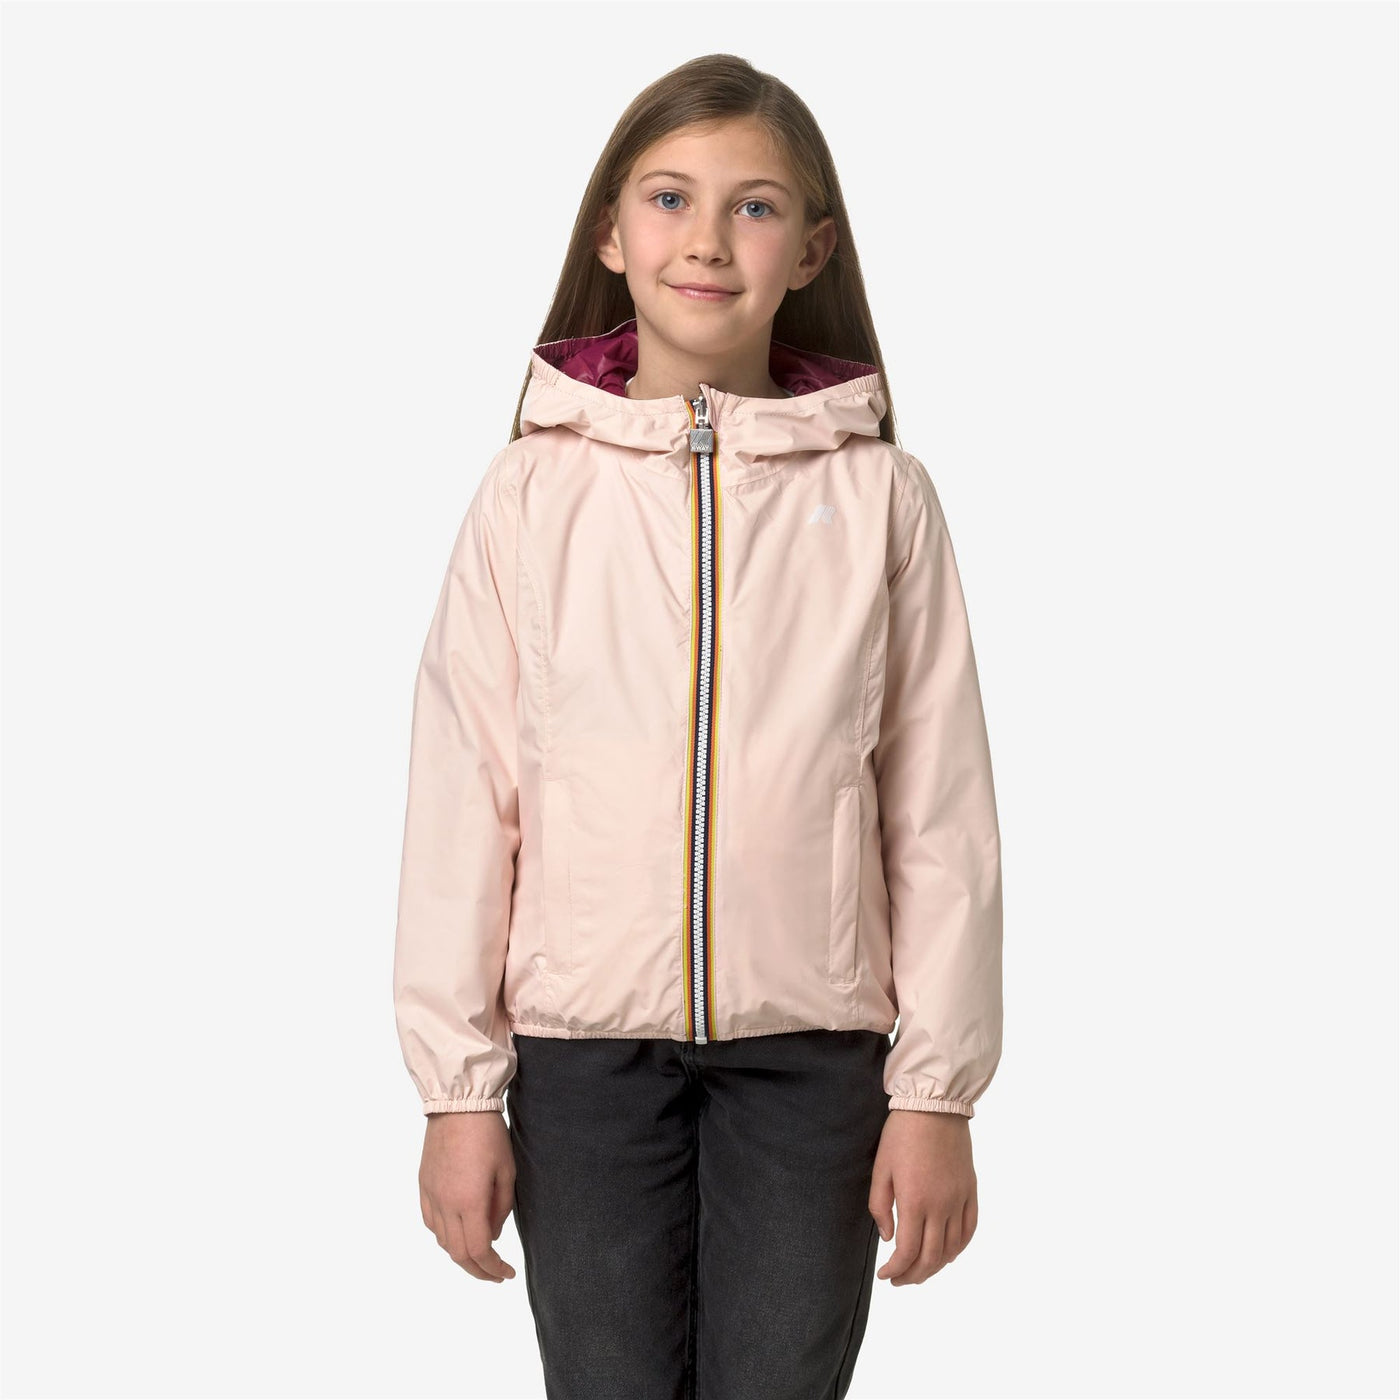 P. LILY ECO PLUS DOUBLE - JACKET - KID UNISEX - PINK RED